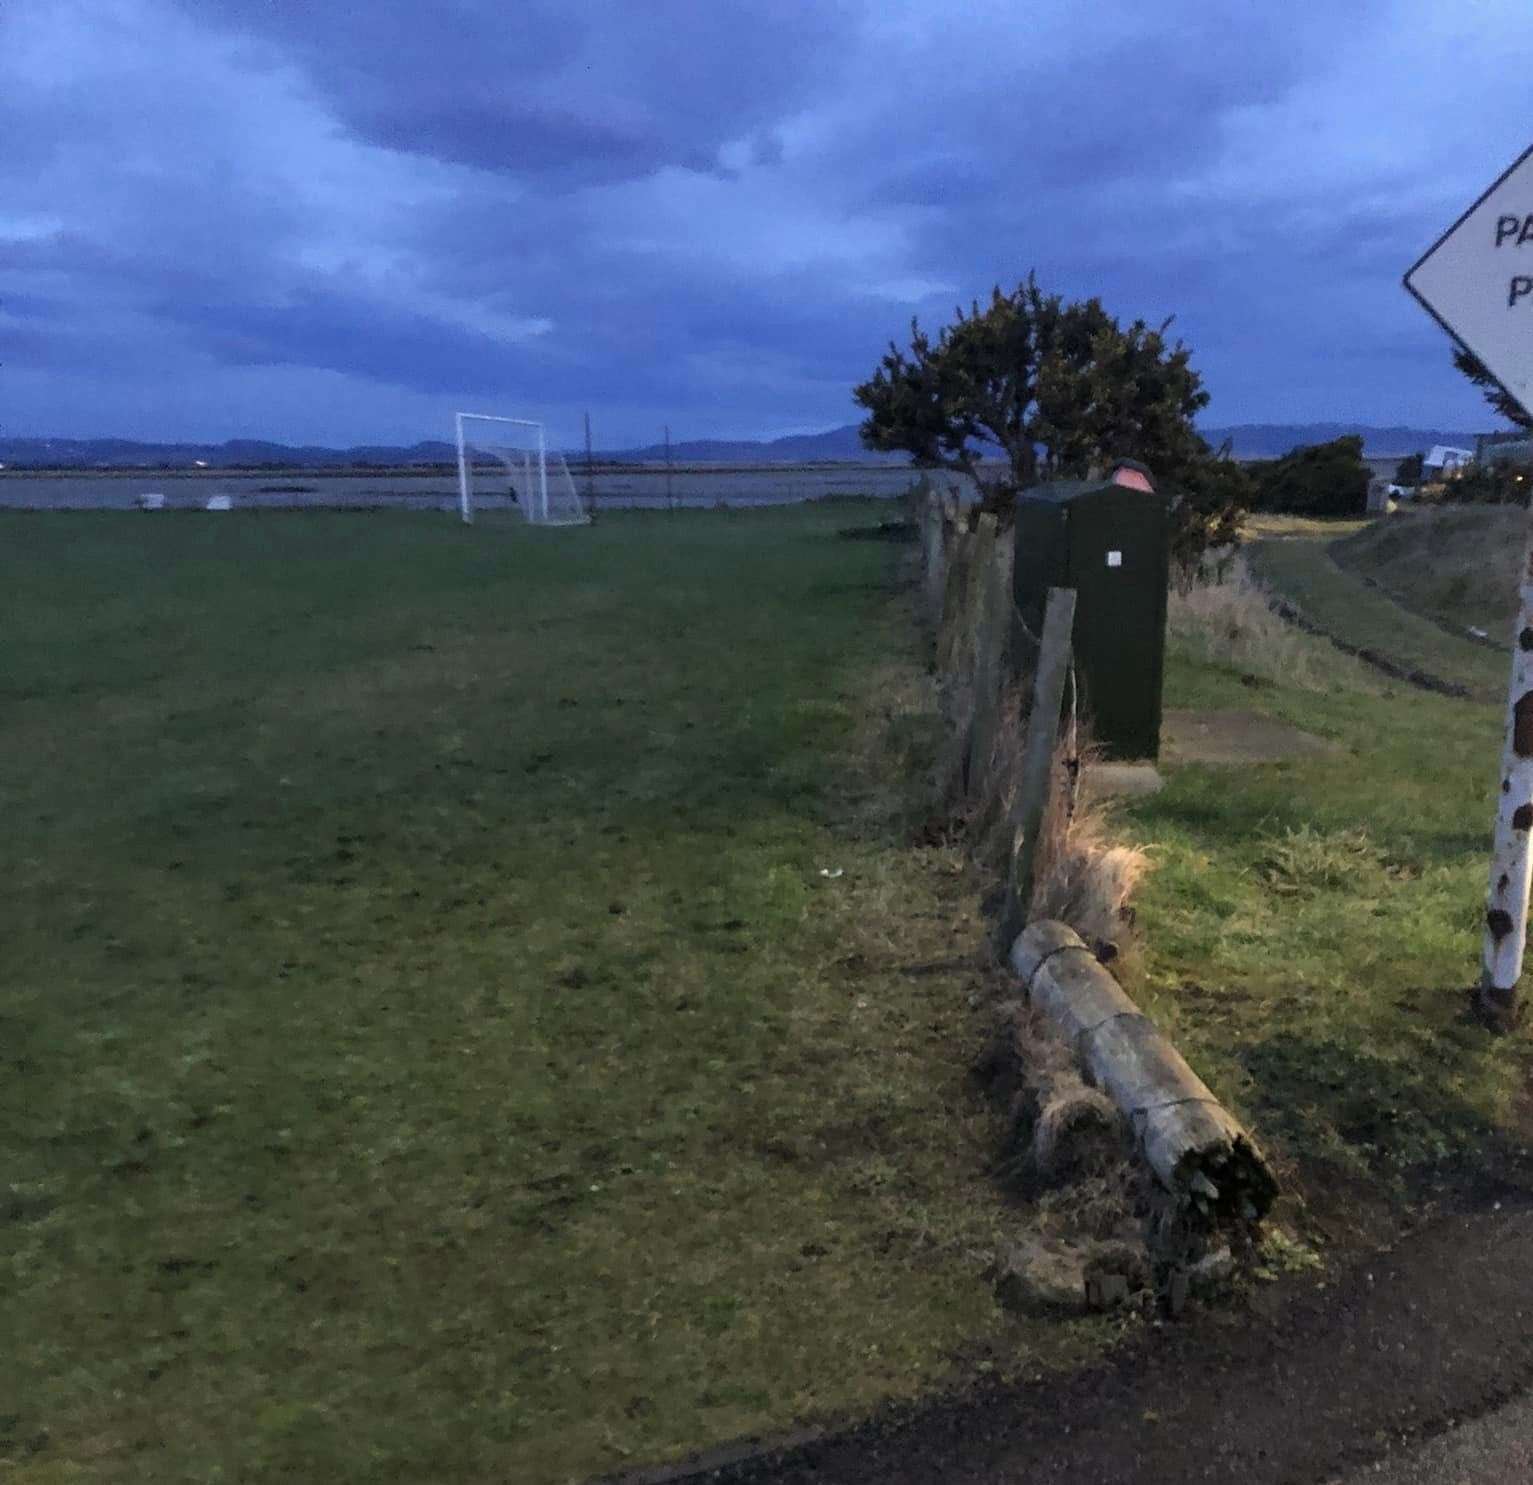 The gates at the entrance to Osprey Park in Inver have been stolen. Photo: Inver FC